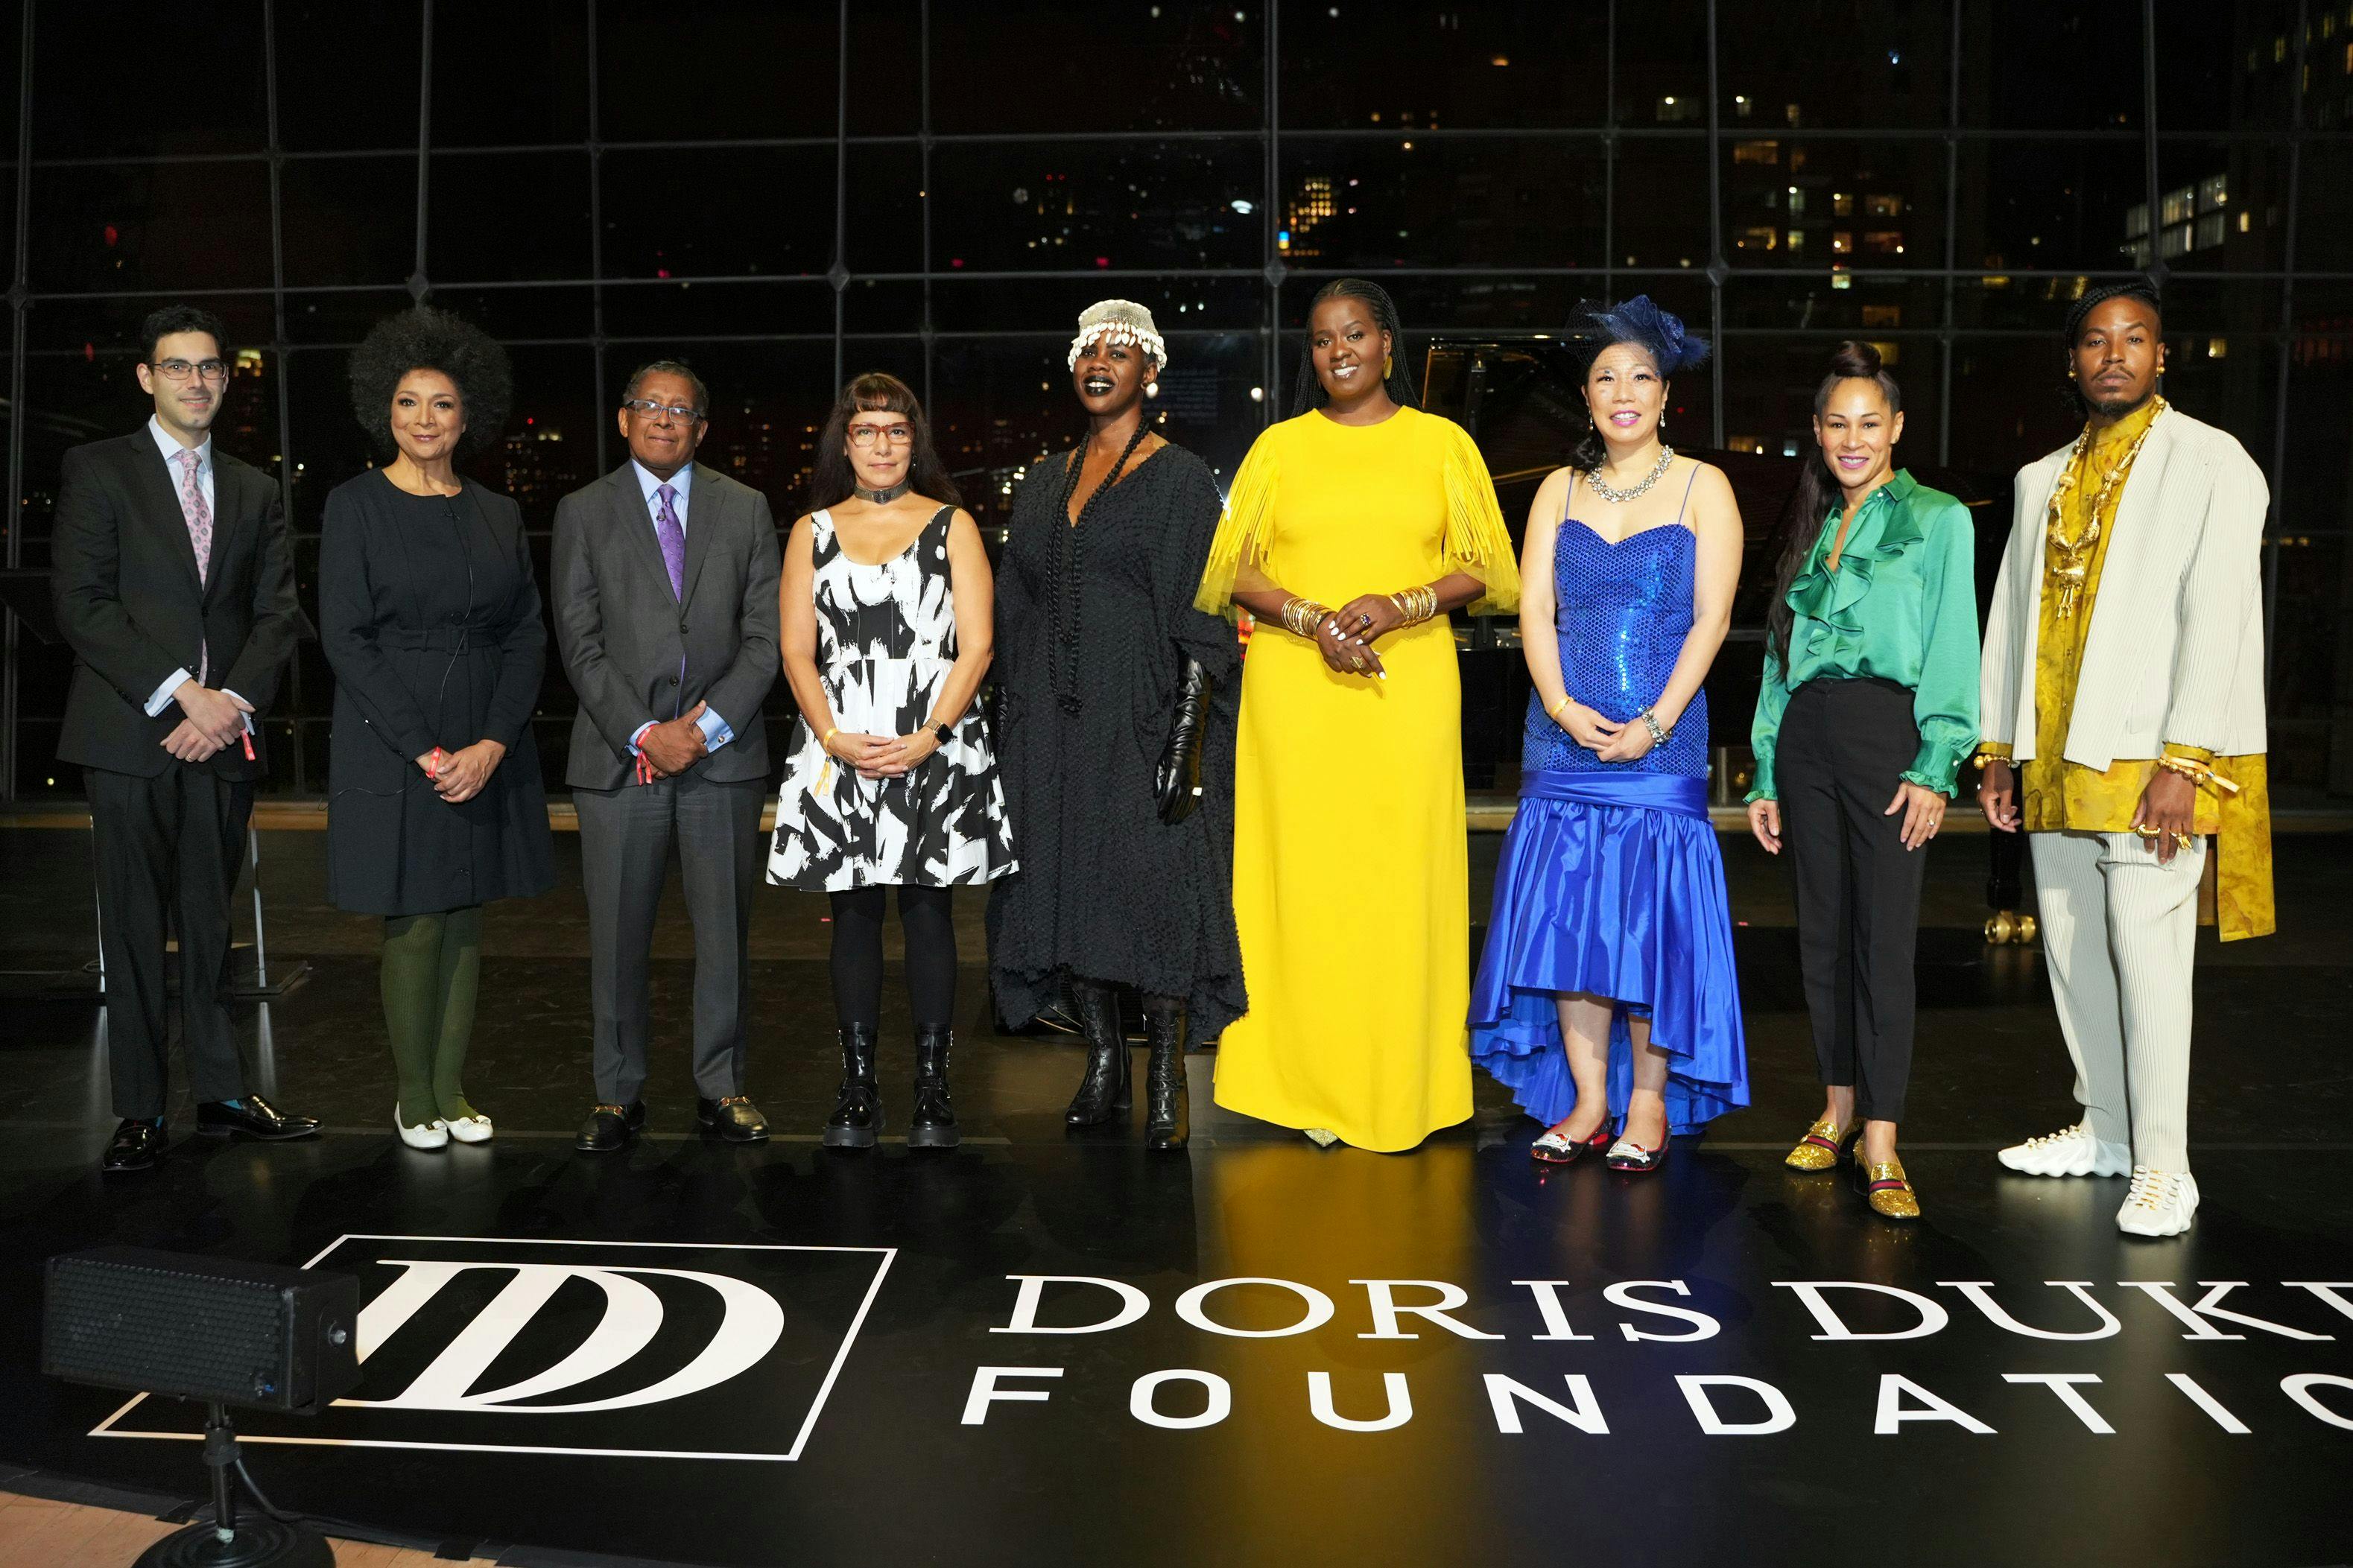 Sam Gill, Maurine Knighton, Bill Wright, Rosy Simas, Charlotte Brathwaite, Somi, Kristina Wong, Ayodele Casel and Chief Xian aTunde Adjuah attend the 10th Anniversary Celebration of the Doris Duke Artist Awards at Appel Room, Jazz at Lincoln Center on February 13, 2023 in New York City. (Photo by Sean Zanni/Patrick McMullan via Getty Images)